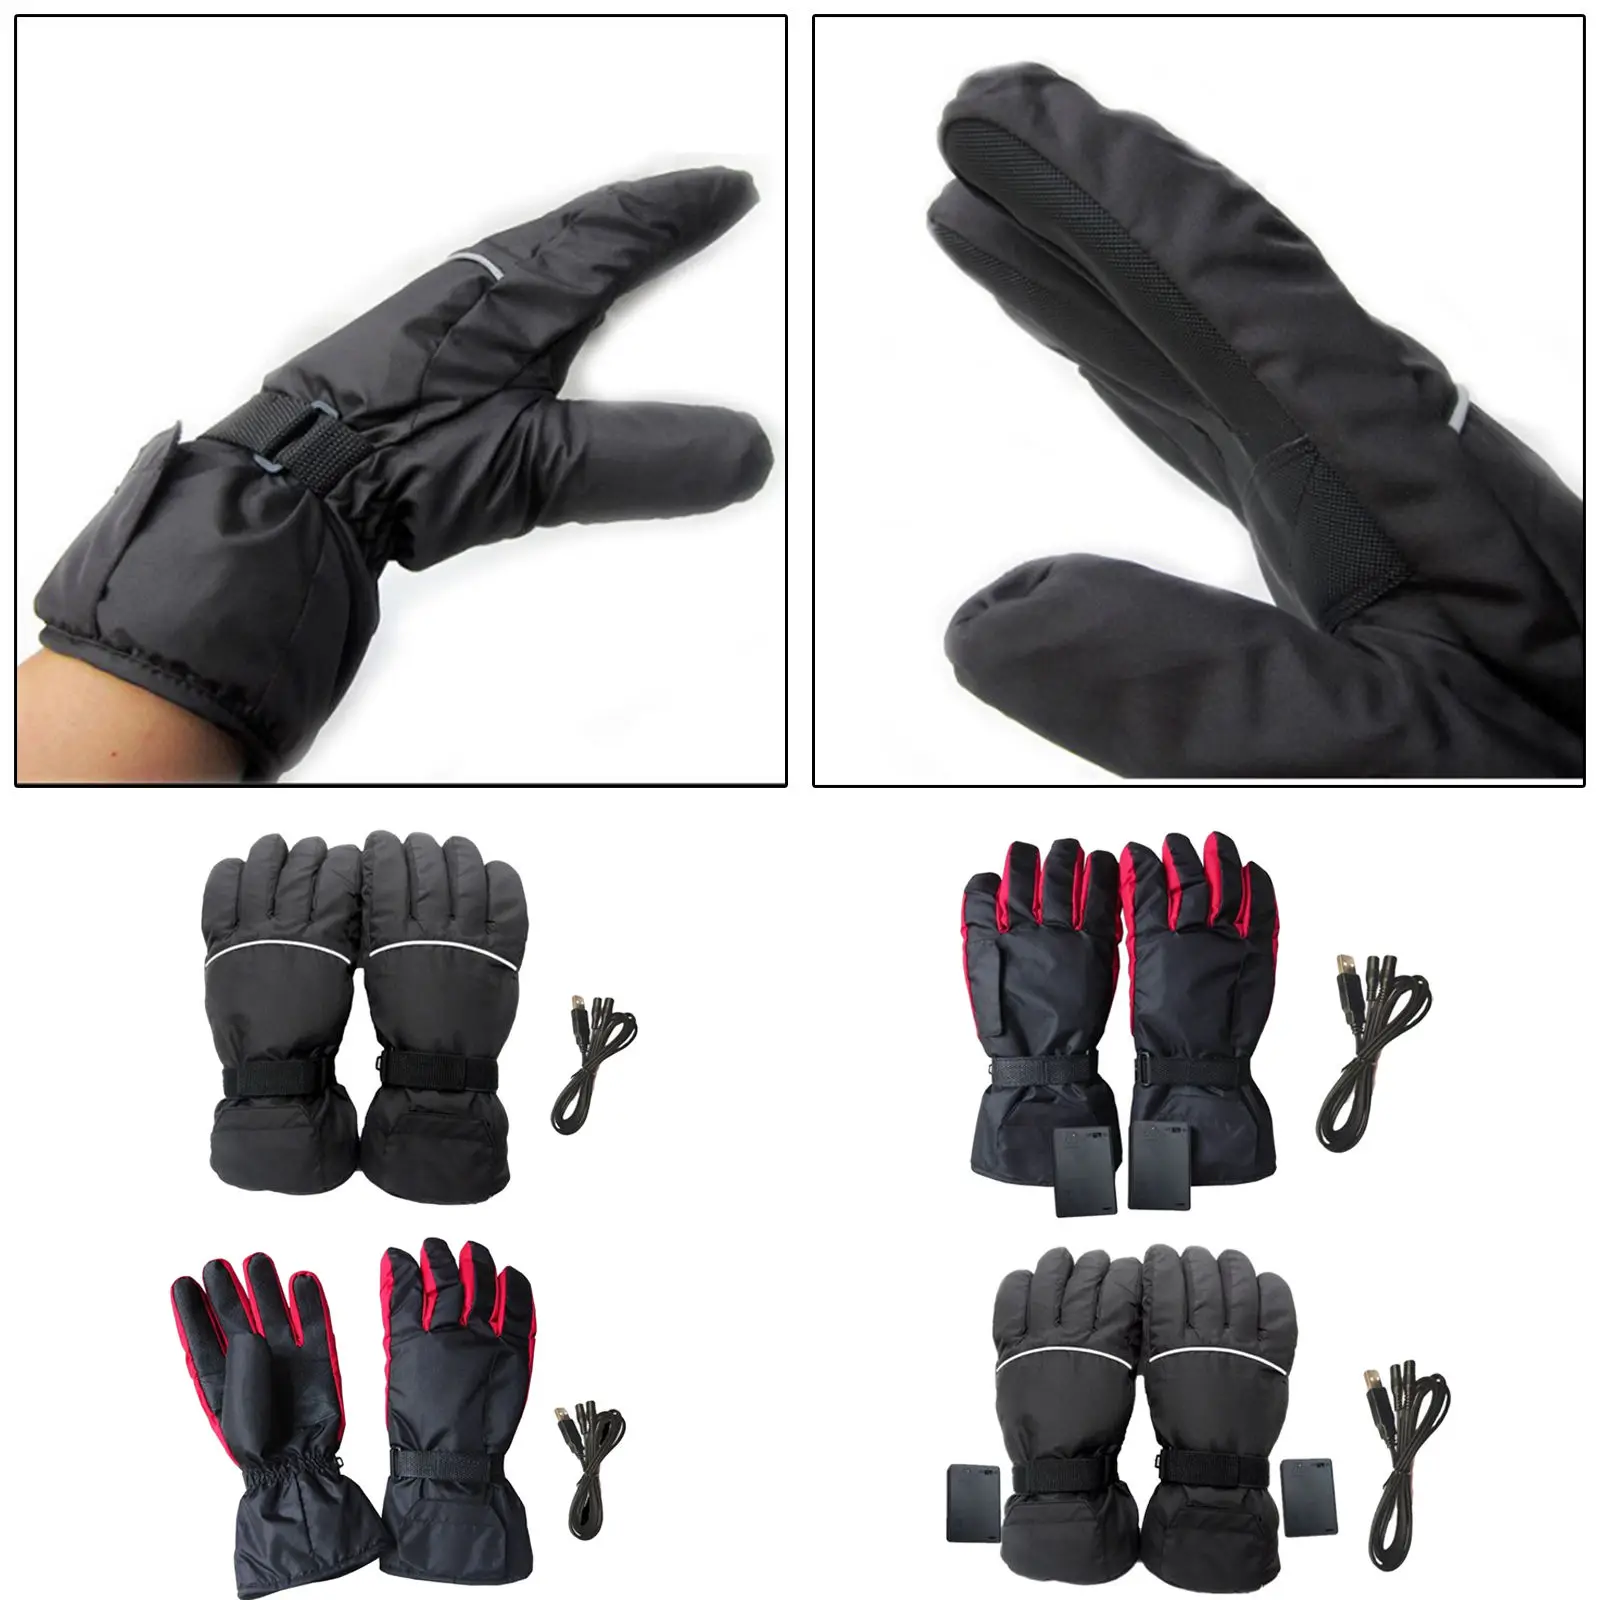 

Heated Gloves Windproof Breathable Winter Thermal Glove for Outdoor Activities Ski Hand Warmer